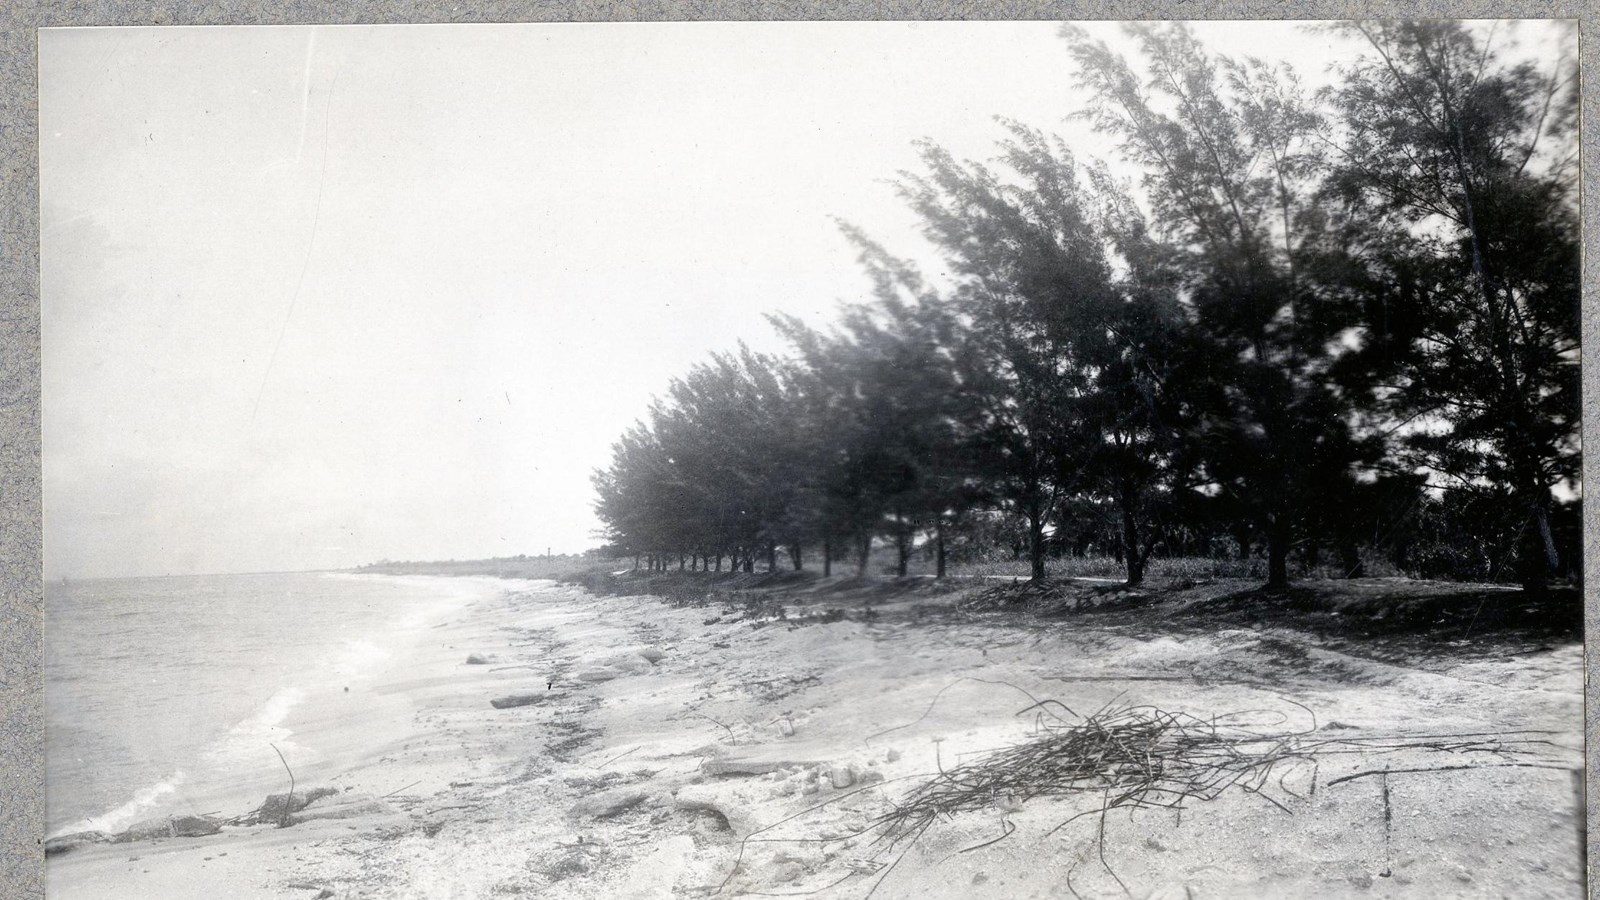 Black and white of sandy beach with water on one side, row of trees on the other